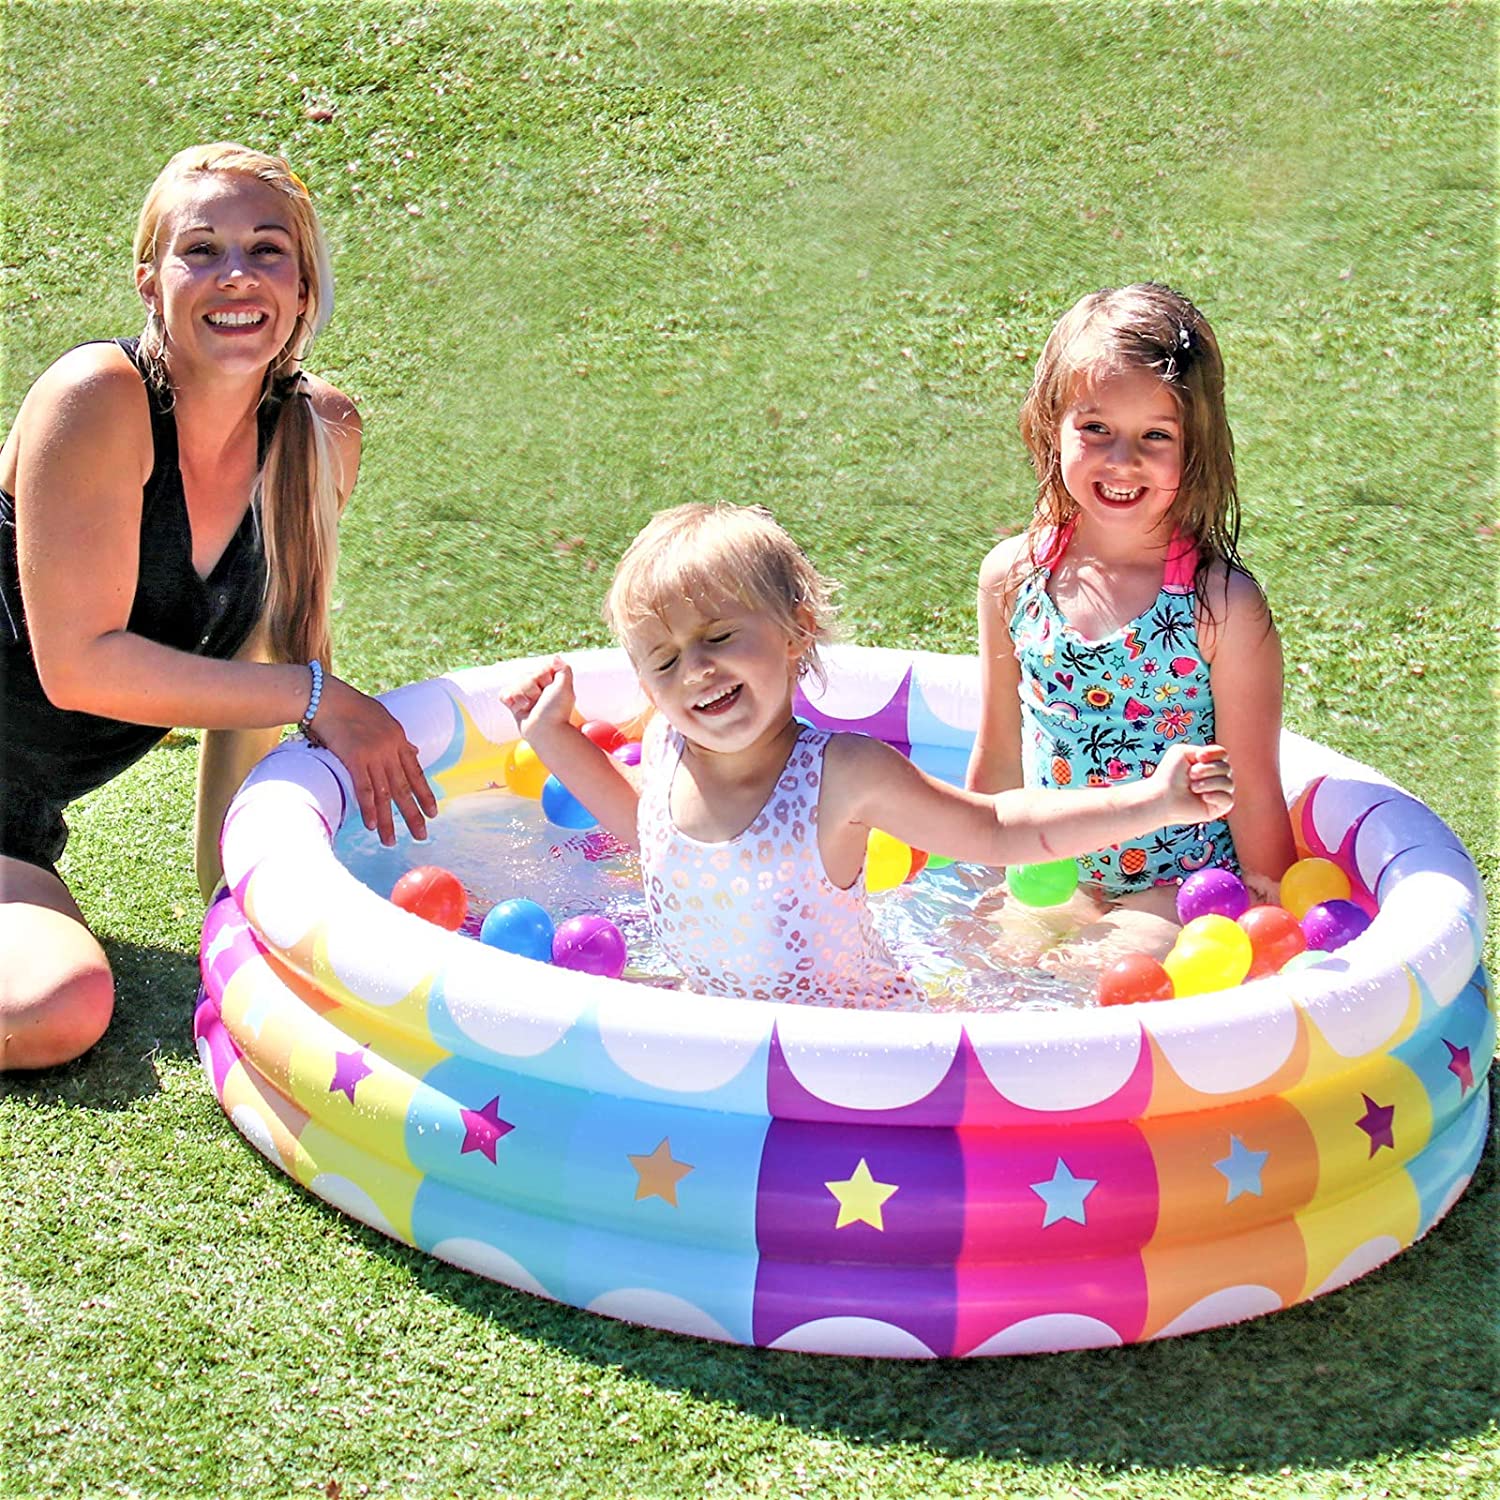 You are currently viewing Fun summer party ideas that kids and adults will enjoy